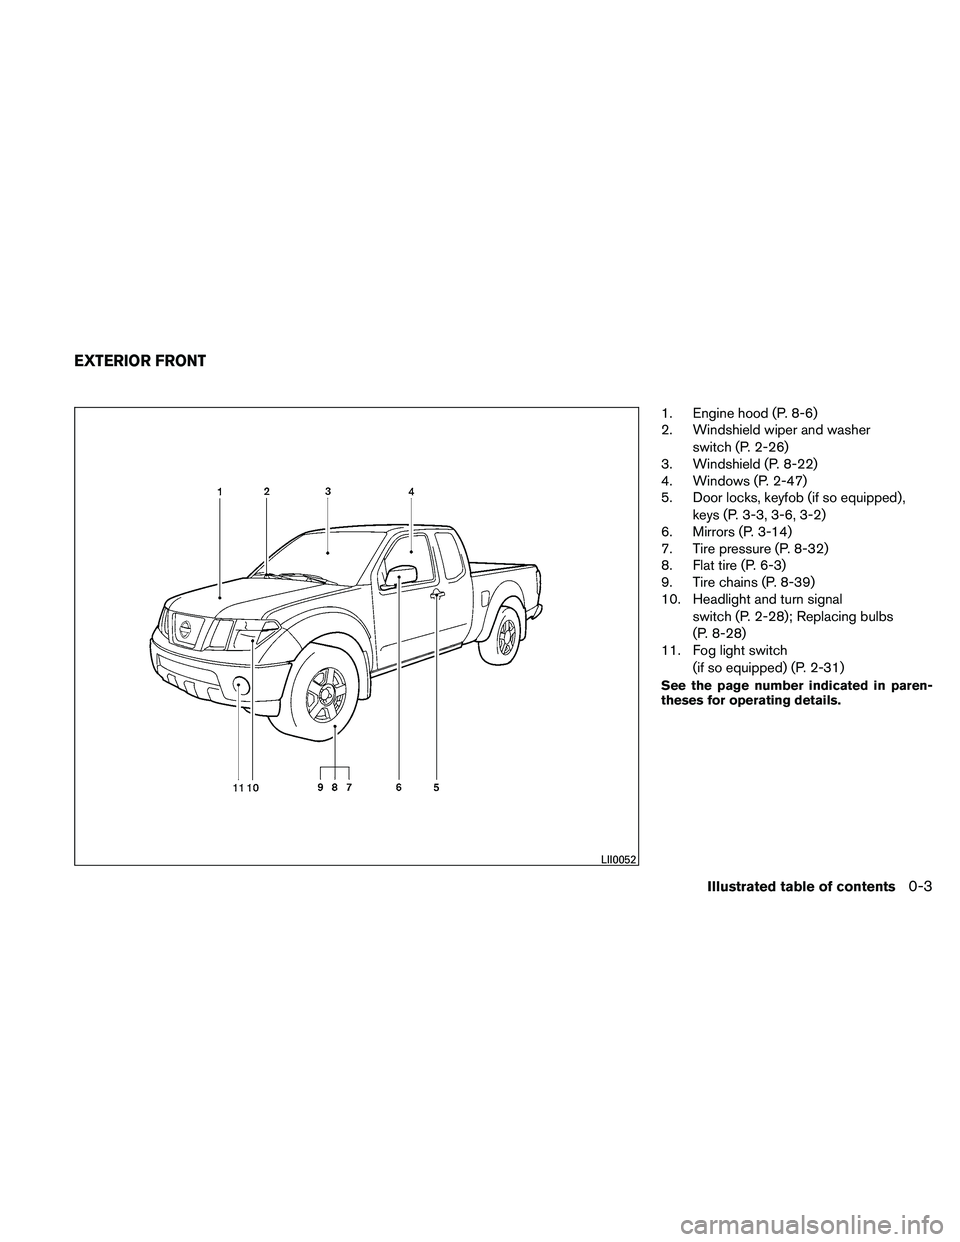 NISSAN FRONTIER 2011  Owner´s Manual 1. Engine hood (P. 8-6)
2. Windshield wiper and washerswitch (P. 2-26)
3. Windshield (P. 8-22)
4. Windows (P. 2-47)
5. Door locks, keyfob (if so equipped) ,
keys (P. 3-3, 3-6, 3-2)
6. Mirrors (P. 3-14